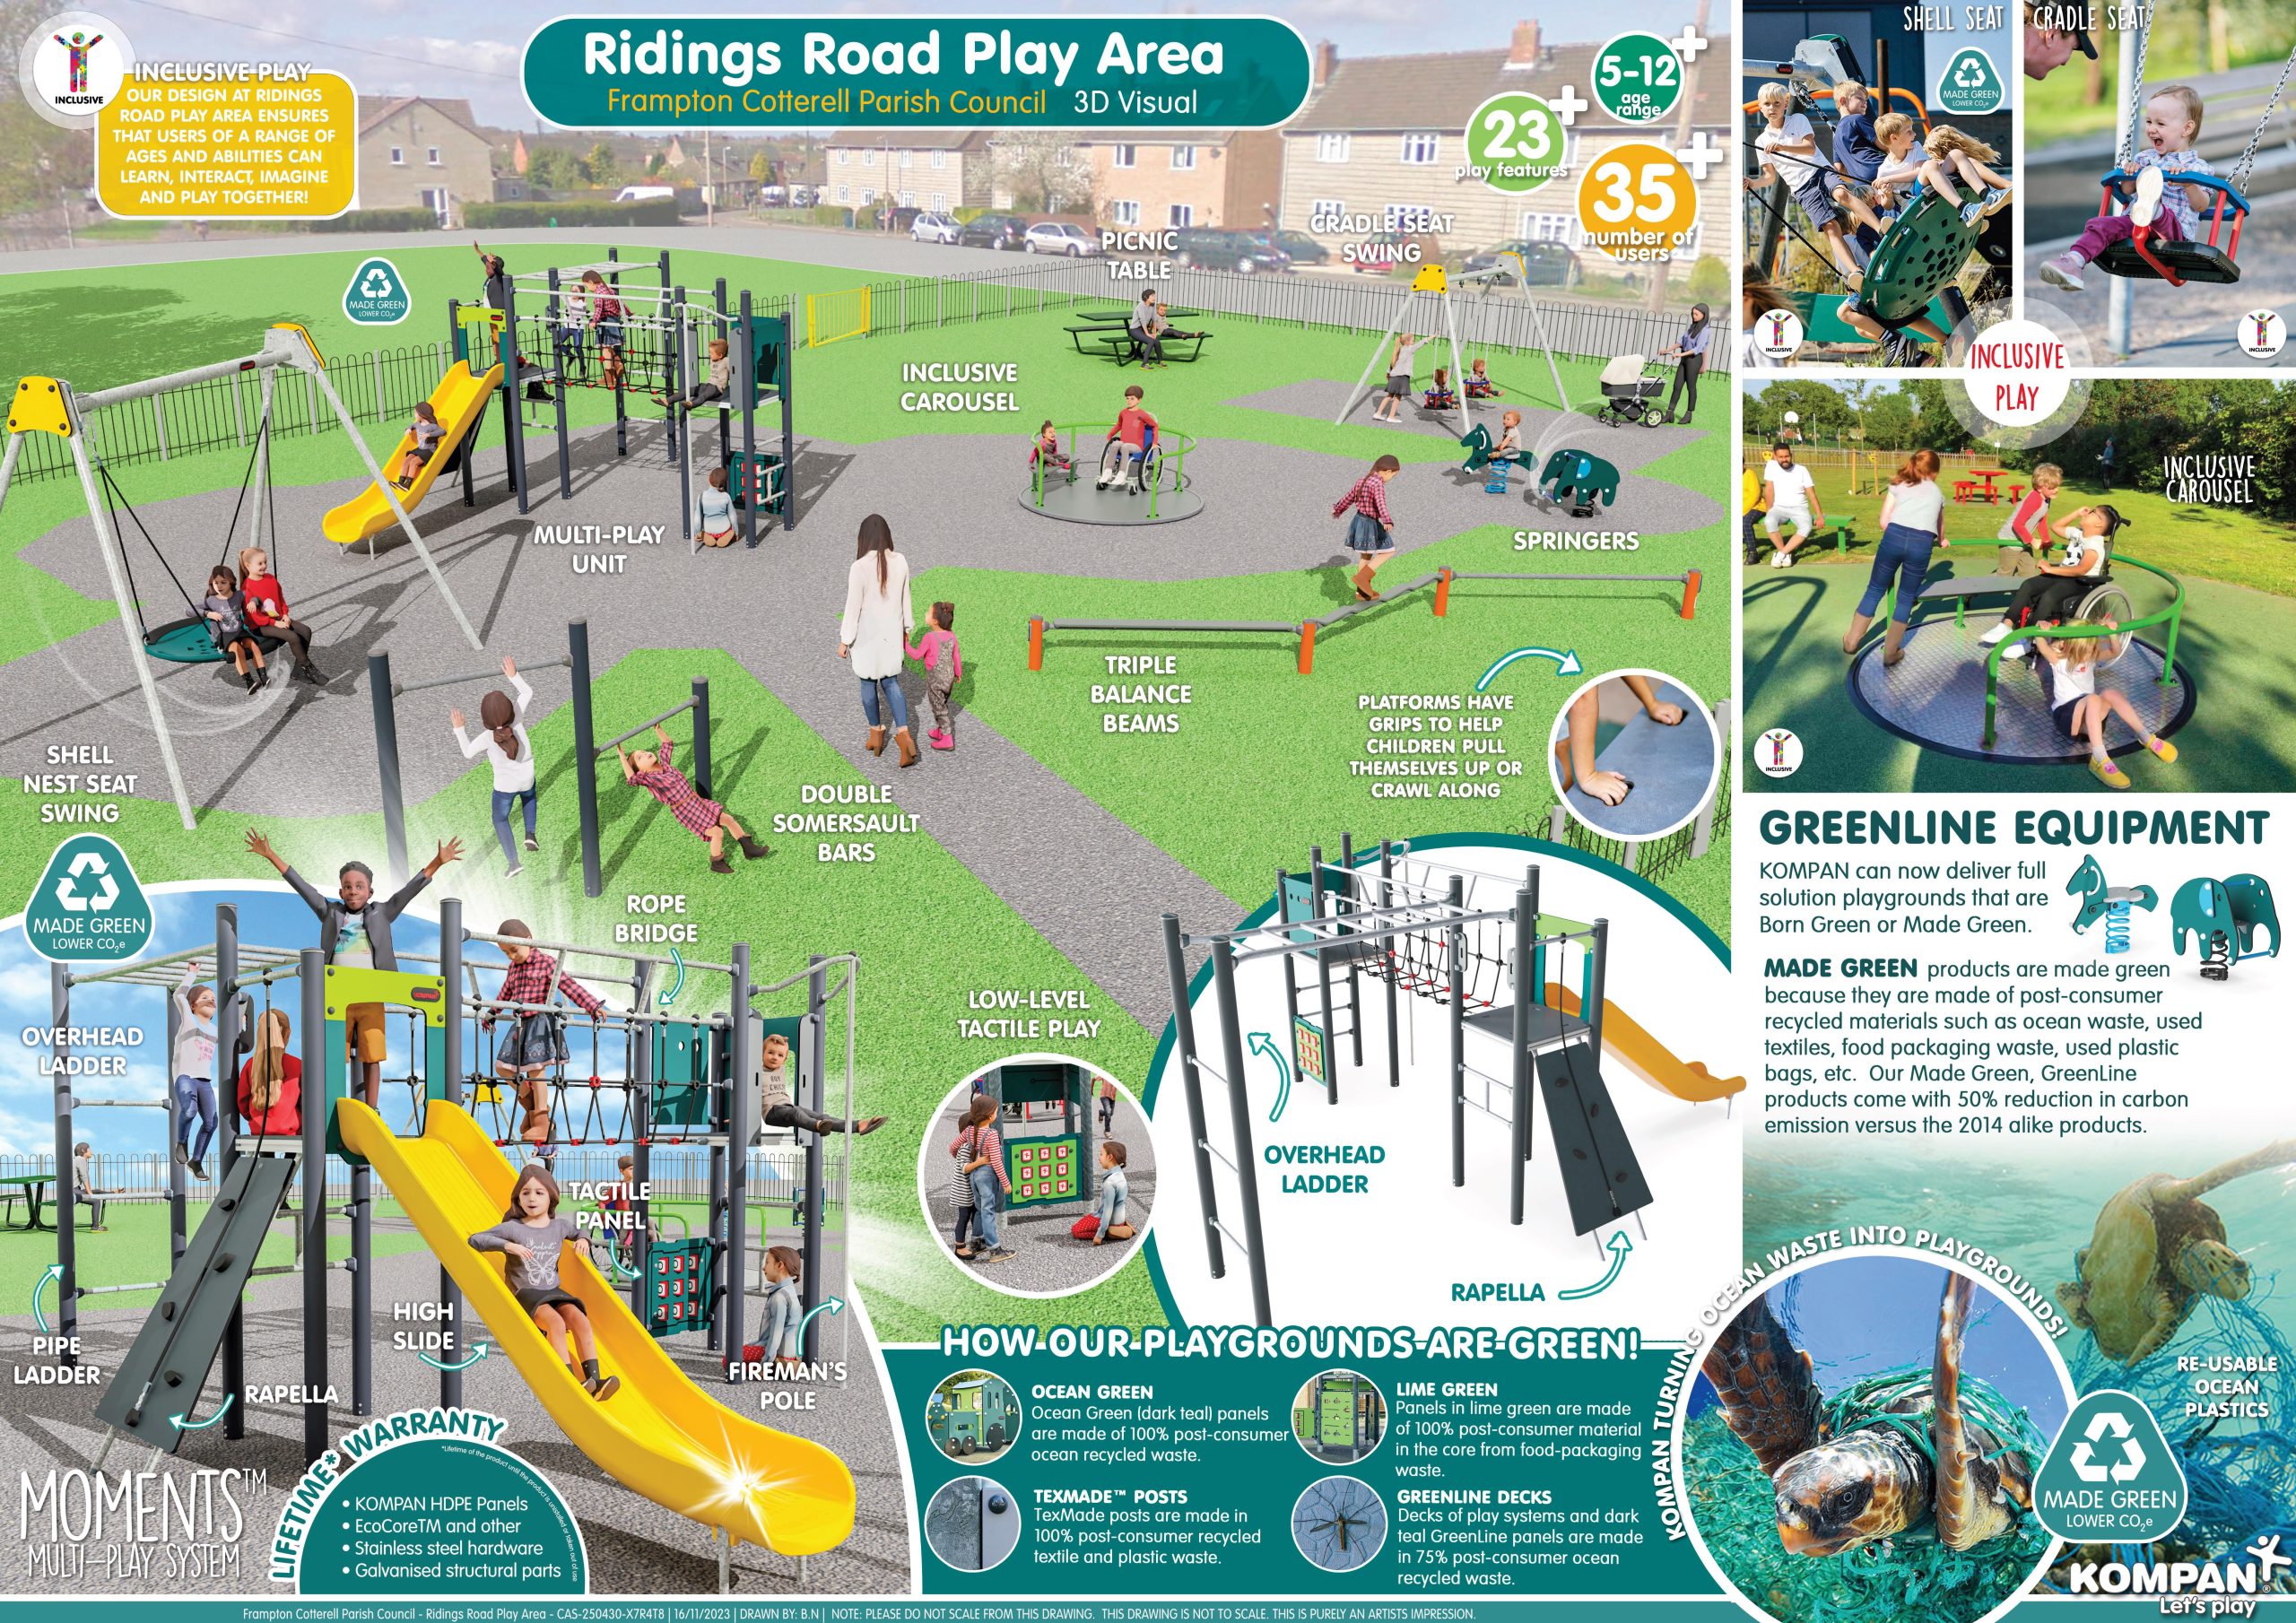 An infographic showing the planned improvements for the Ridings Road Play Area. Ridings Road Play Area, Frampton Cotterell Parish Council: a 3D visual. A computer generated image of Ridings Road Play Area as it will look when improvements are carried out. Inclusive Play – Our design at Ridings Road Play Area ensures that users of a range of ages and abilities can learn, interact, imagine and play together! 5-12+ age range. 23+ play features. 35+ number of users. Made green, lower C02. Labelled equipment on 3D visual: Shell nest swing seat, multi-play unit, double somersault bars, inclusive carousel, triple balance beams, cradle swing seat, springers, picnic table. A close up of the multi-play unit, “Moments TM Multi-play System, with labels: overhead ladder, rope bridge, pipe ladder, high slide, rapella, tactile panel – low level tactile play, fireman’s pole. Platforms have grips to help children pull themselves up or crawl along. Lifetime warranty: KOMPAN Hope PDE Panels, EcoCore TM and other, Stainless steel hardware, Galvanised structural parts. How our playgrounds are green: Ocean Green – dark teal panels are made of 100% post-consumer ocean-recycled waste. Texmade TM posts – TexMade posts are made in 100% post-consumer recycled textile and plastic waste. Lime Green – panels in lime green are made of 100% post-consumer material in the core from food-packaging waste. Greenline Decks – Decks of play systems and dark teal GreenLine panels are made in 75% post-consumer ocean recycled waste. Kompan: turning ocean waste into playgrounds. Greenline Equipment: KOMPAN can now deliver full solution playgrounds that are Born Green or Made Green. Made Green products are made of post-consumer recycled materials such as ocean waste, used textiles, food packaging waste, used plastic bags, etc. Our Made Green, Greenline products comes with 50% reduction in carbon emission versus the 2014 alike products. 